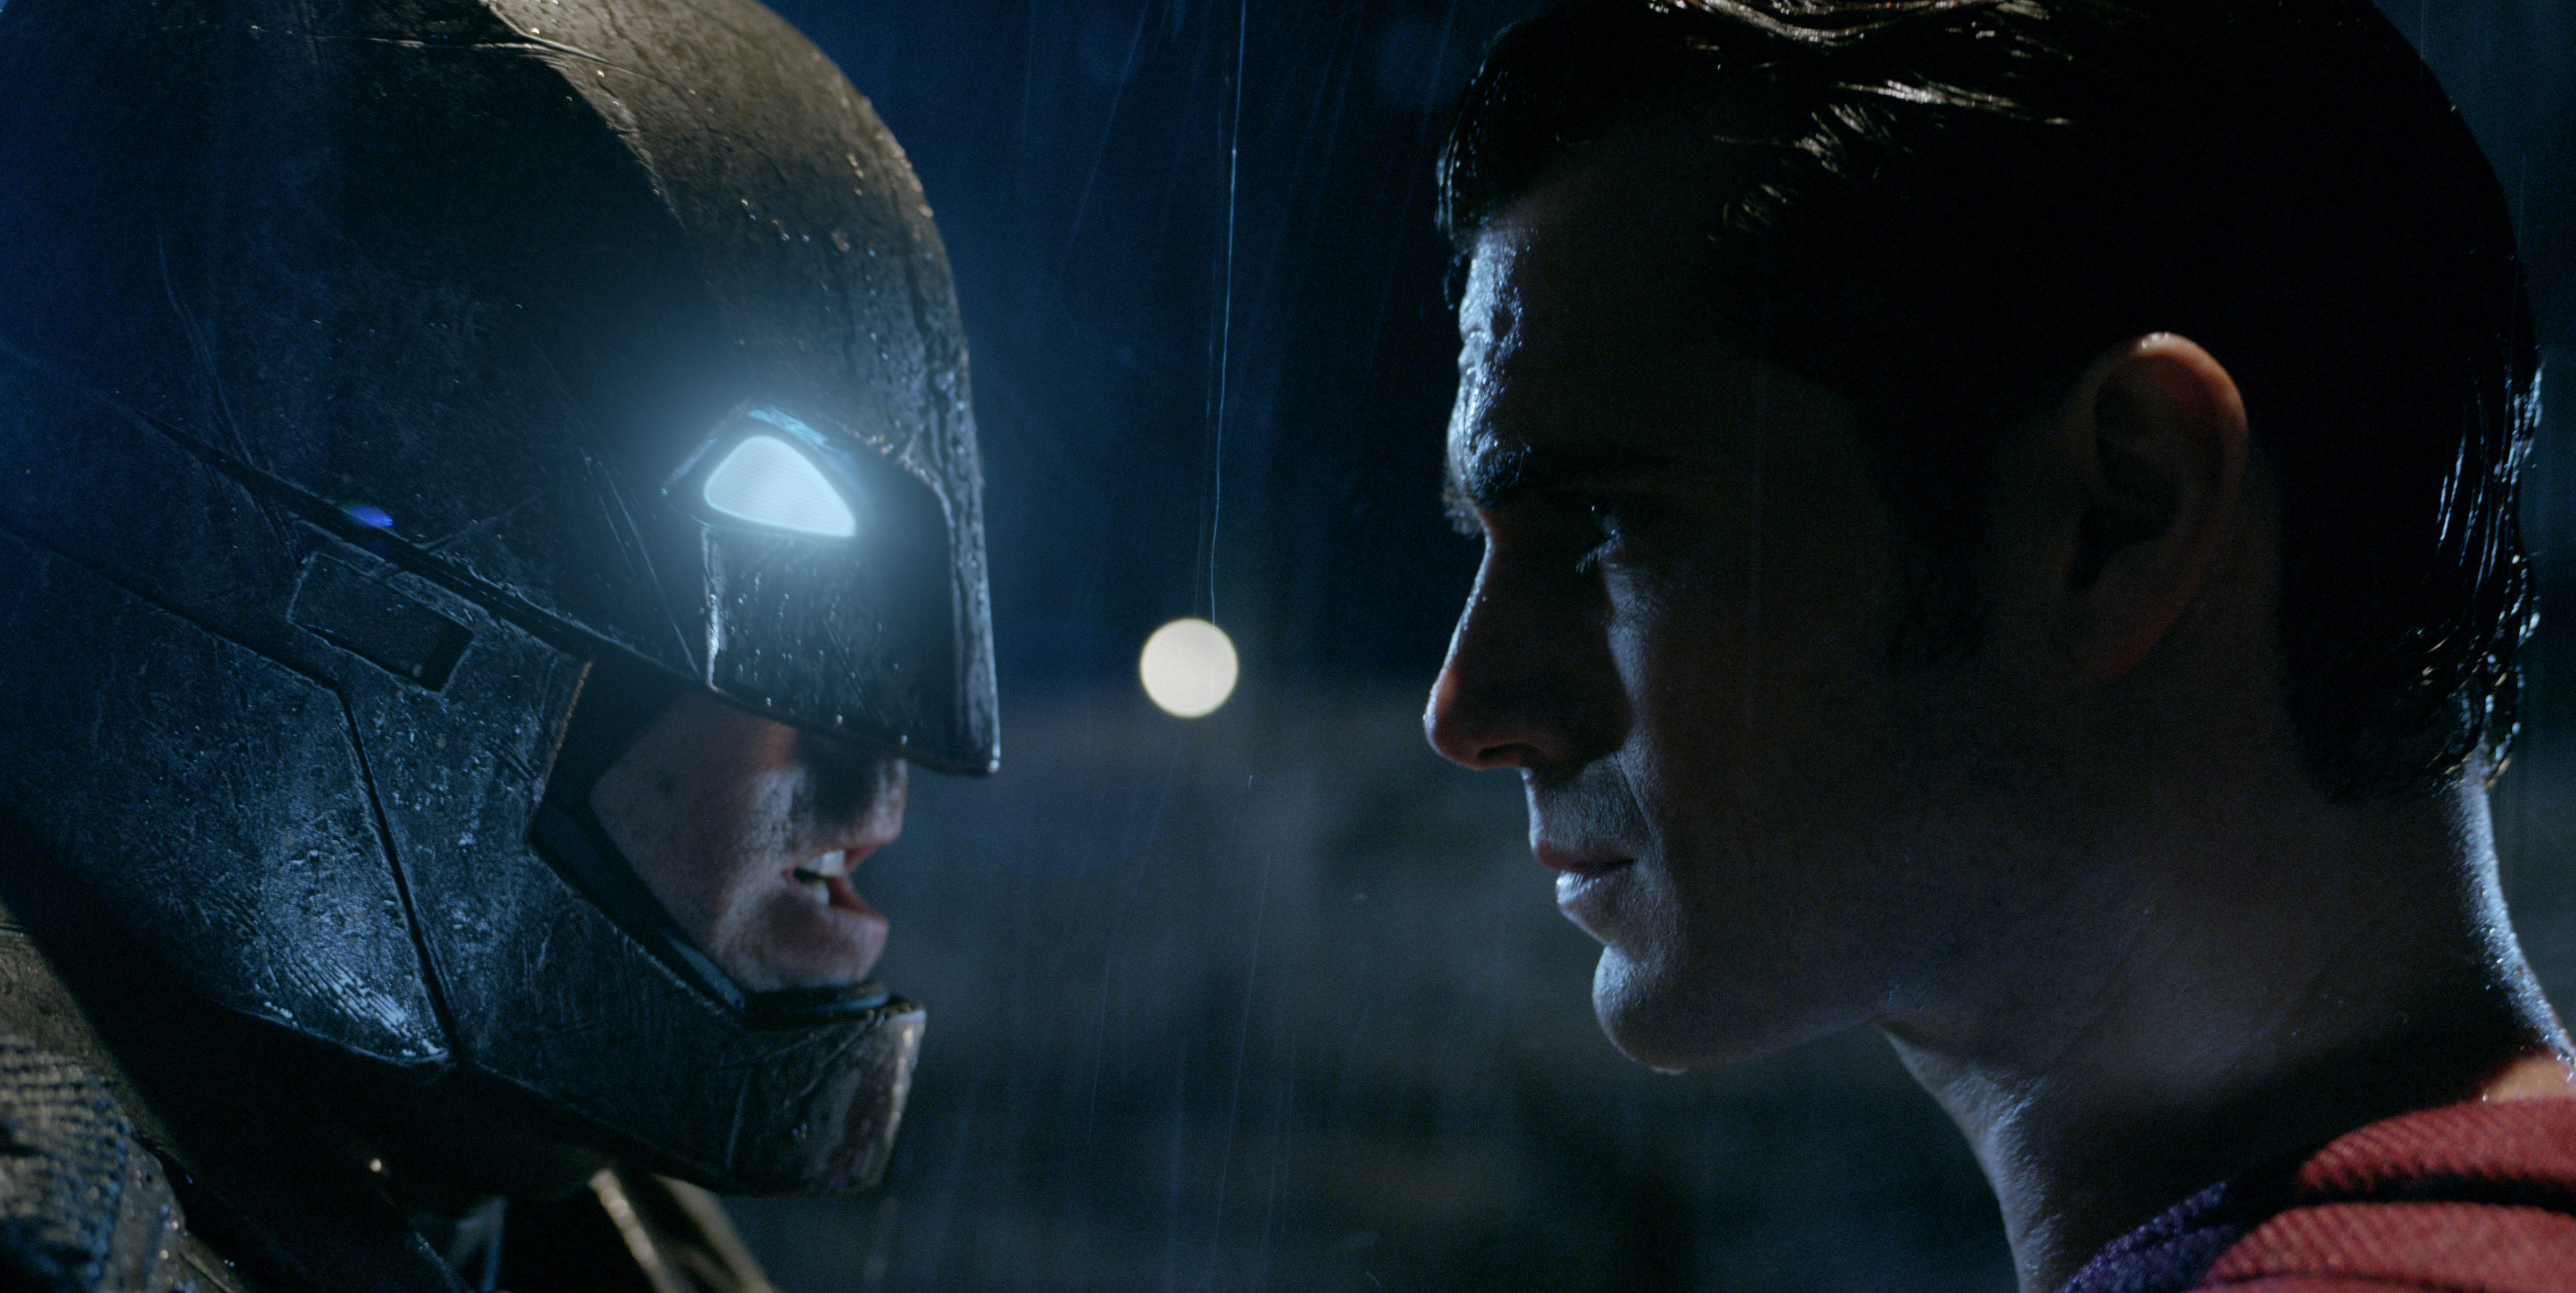 BATMAN V SUPERMAN: DAWN OF JUSTICE Wears Viewers Down With Dourness and Destruction